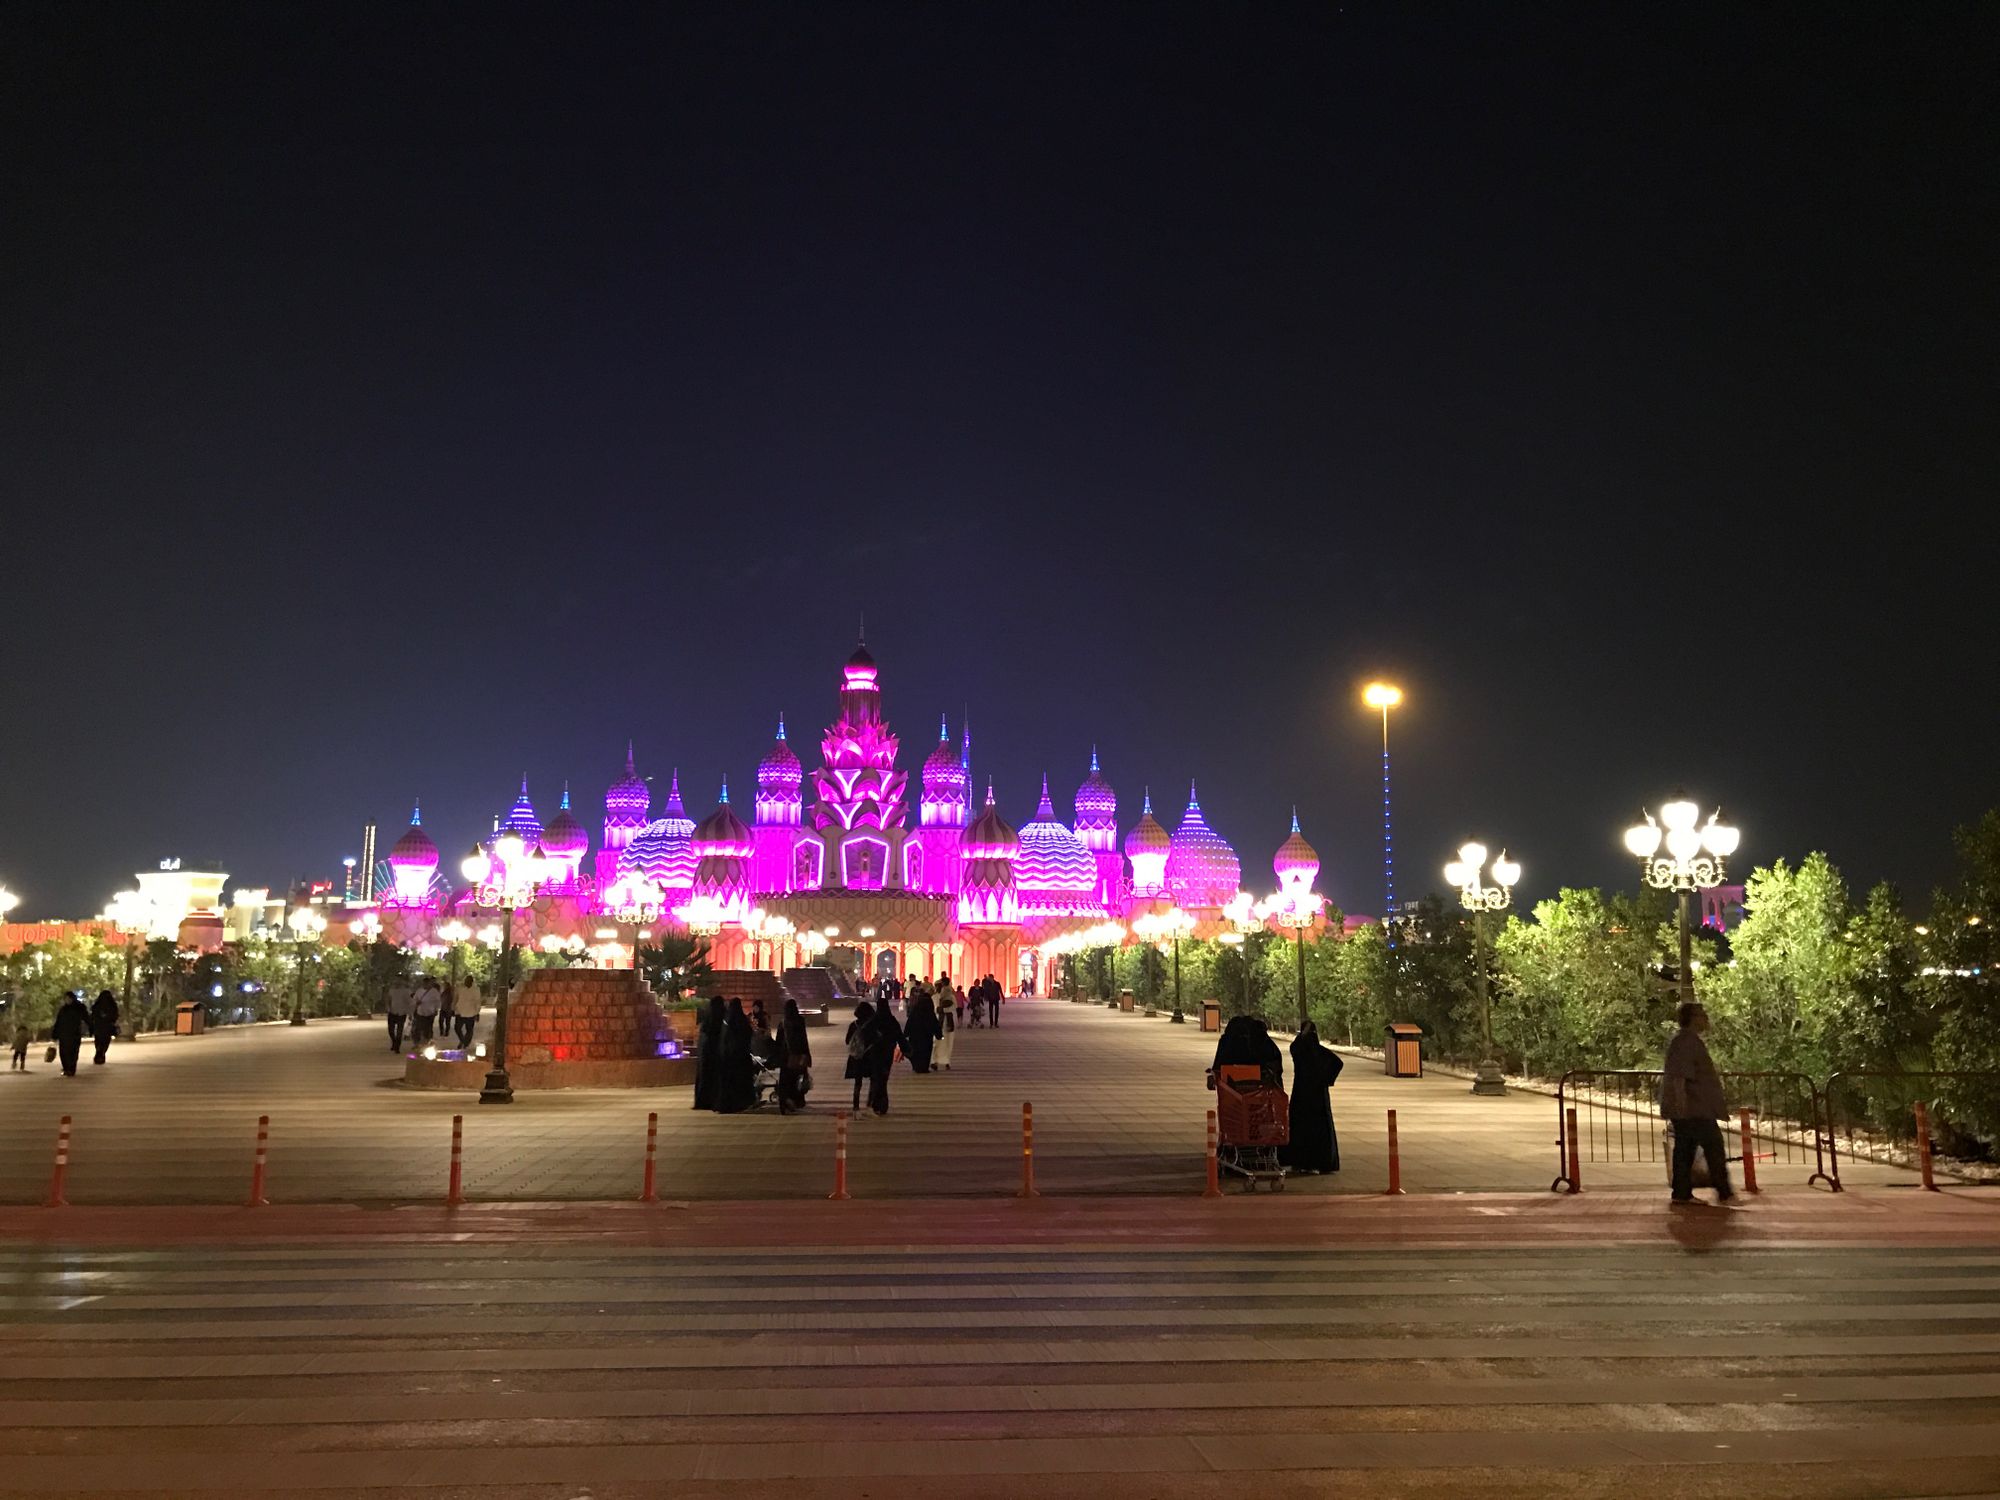 Top 5 Things To Do At Global Village In Dubai This Season